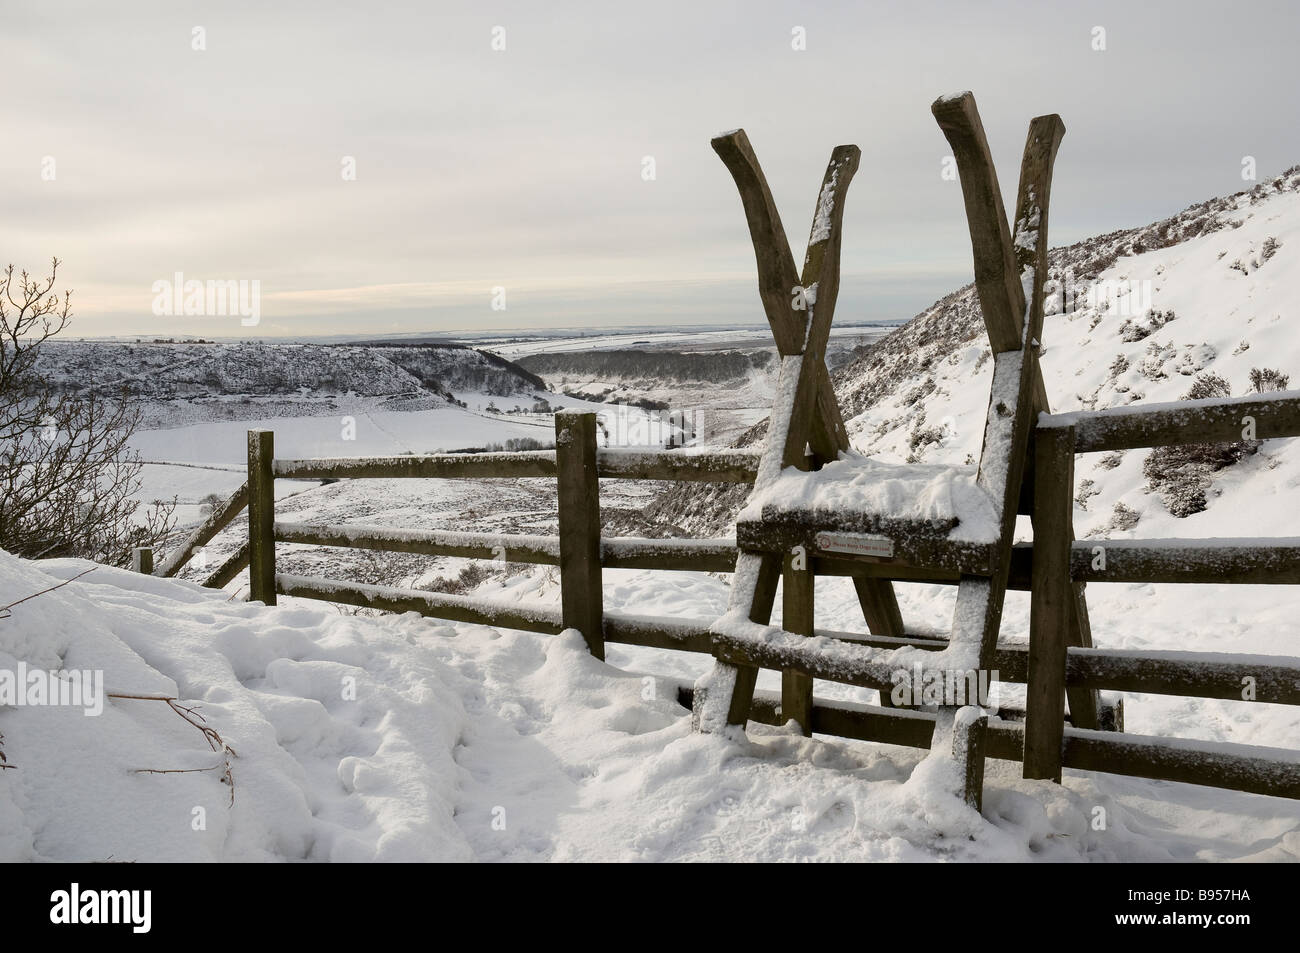 Wooden ladder stile over fence in winter snow Hole of Horcum North Yorkshire England UK United Kingdom GB Great Britain Stock Photo